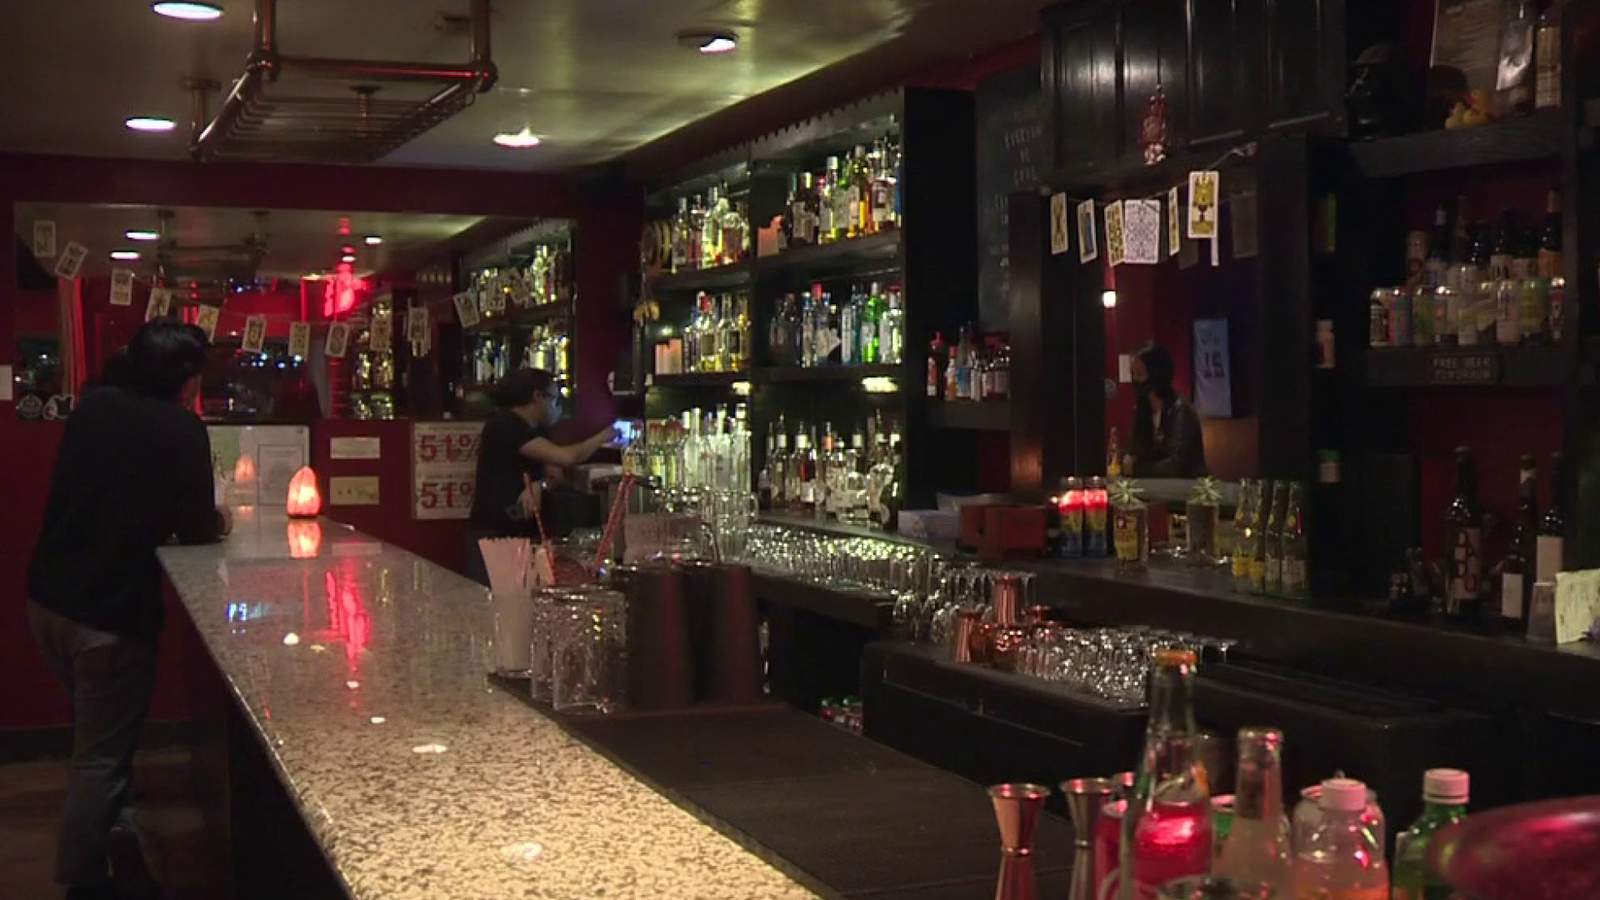 Bexar County Judge says he will shut down bars again if COVID-19 rate climbs higher